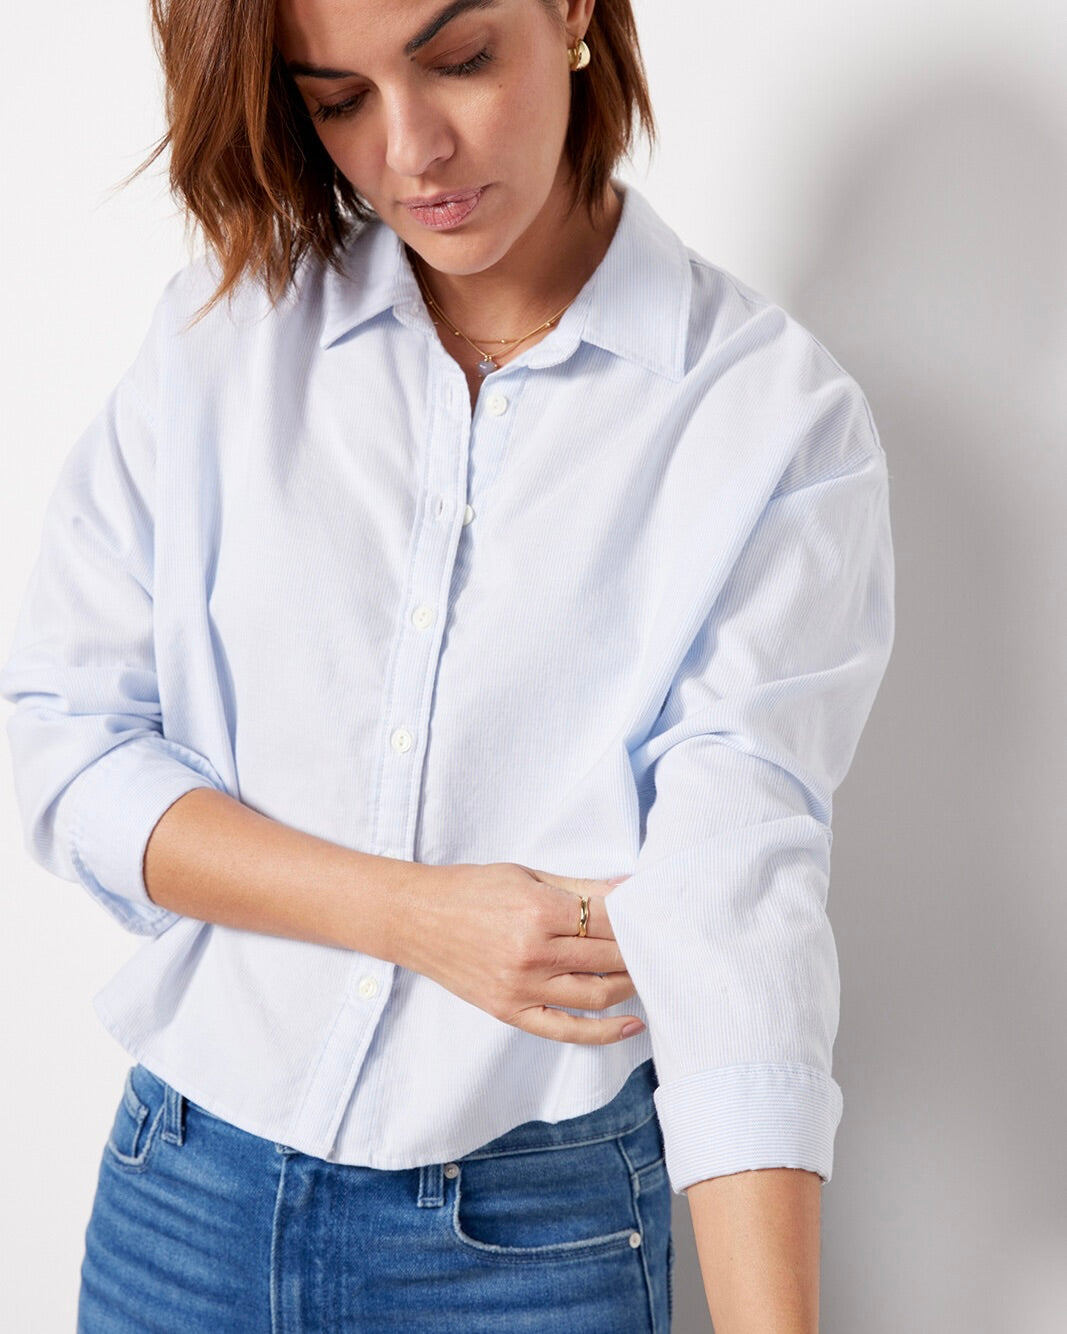 Model wearing Faherty Stretch Oxford Cropped Shirt wearing jeans on a white background